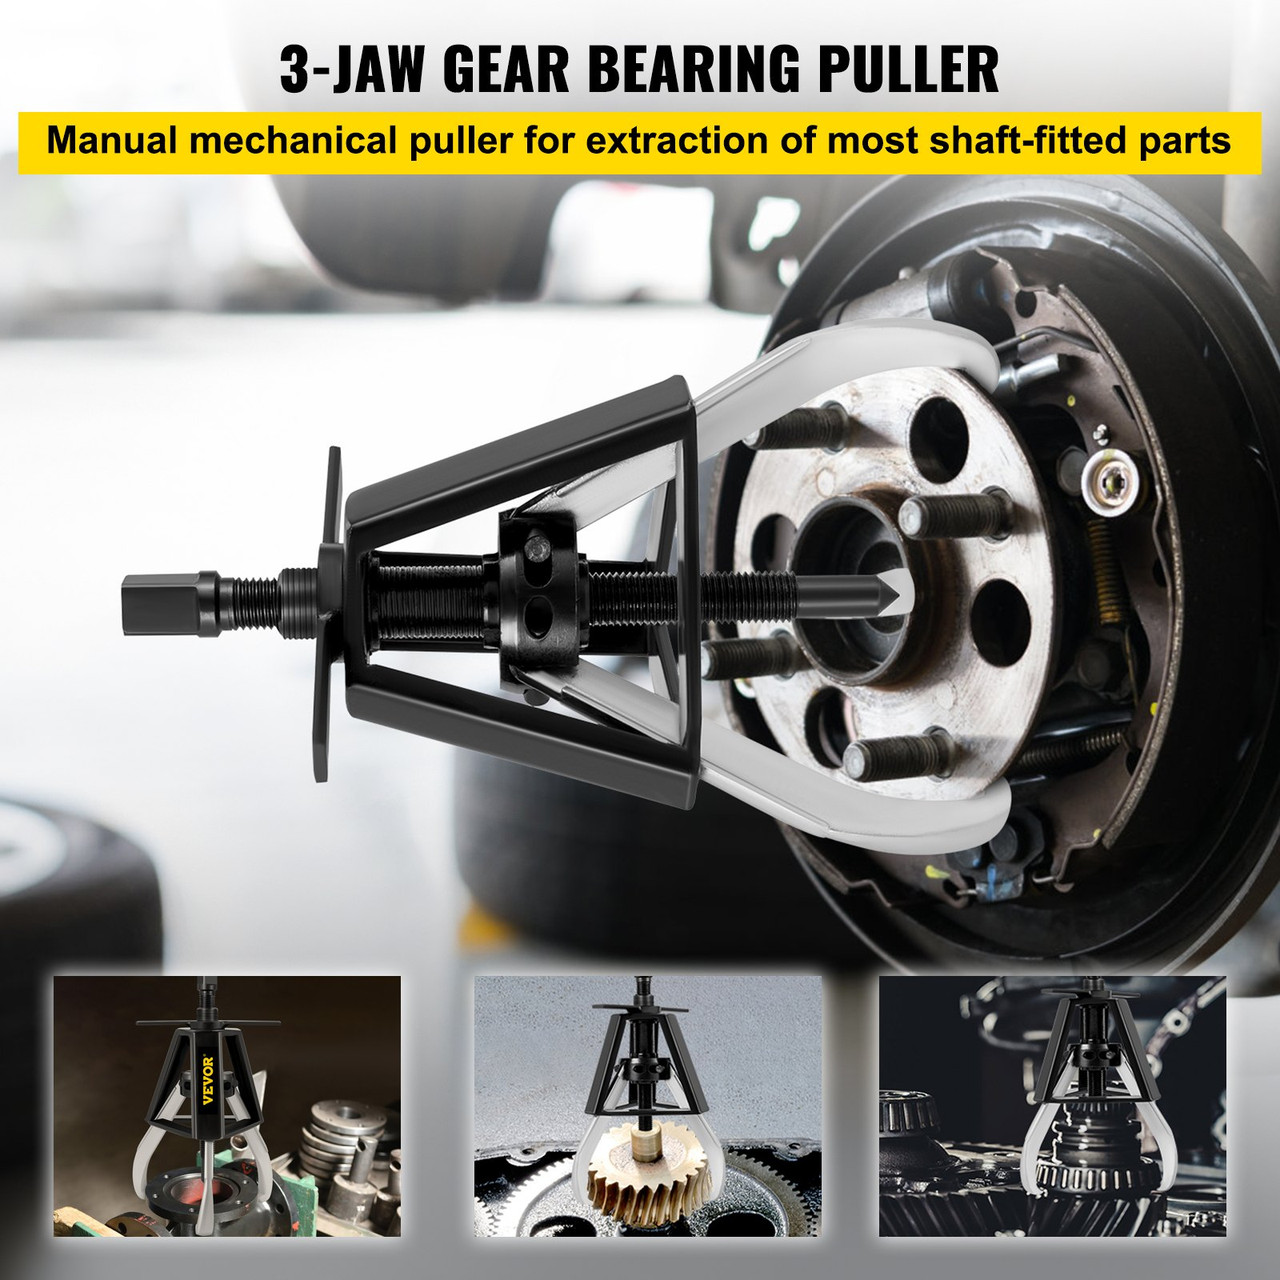 3 Jaw Gear Puller, 10 Ton/22040 LBS Capacity Manual Puller,11" -16.3" Spread Reach and 4.4"- 9.8" Spread Range, 14.5" Lead Screw Length Gear Removal Tools For Slide Gears, Pulleys, and Flywheels